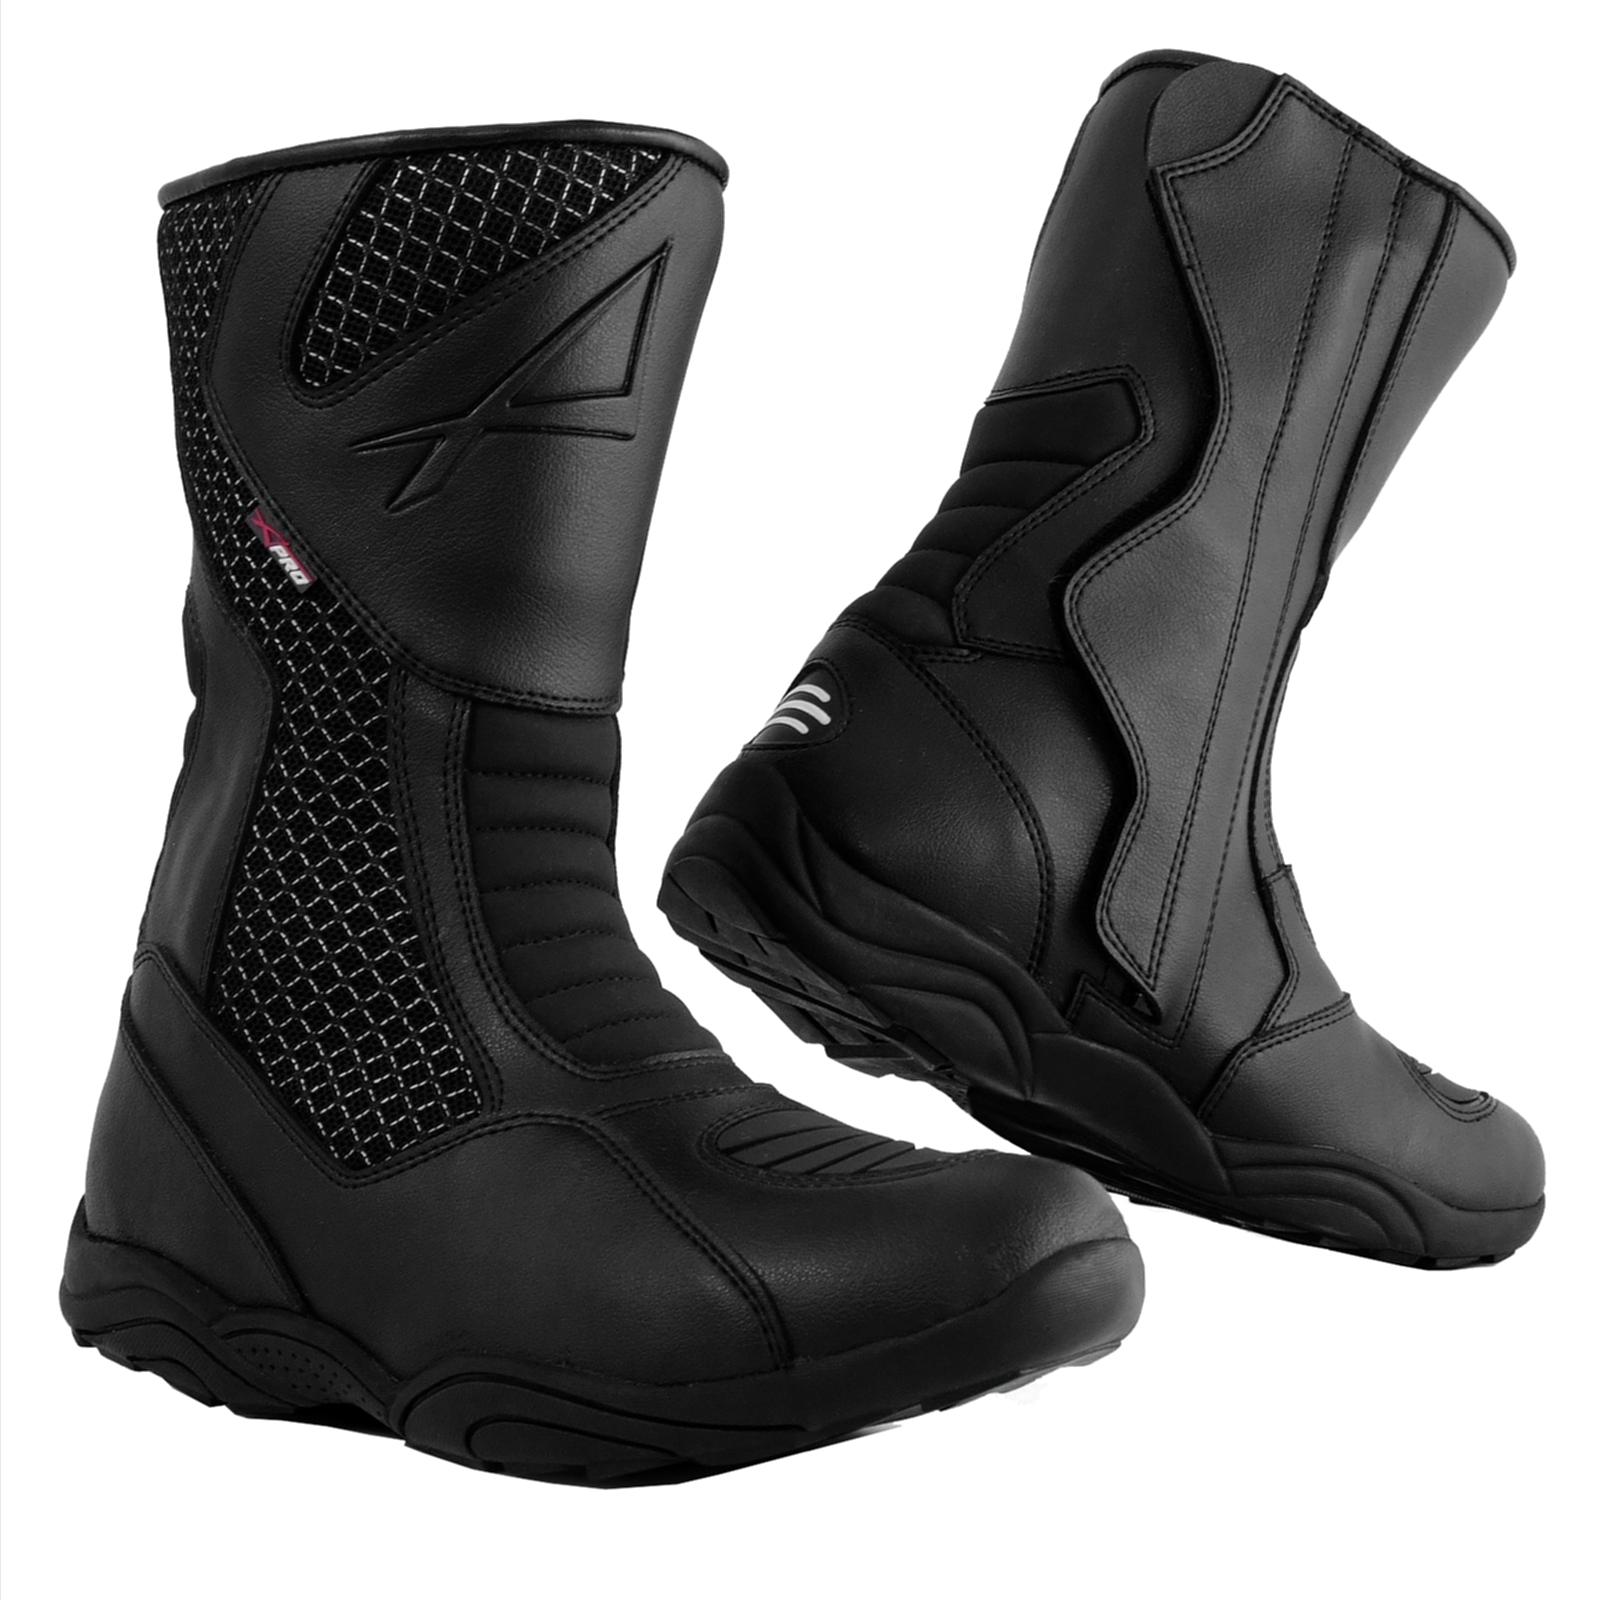 Botas Moto impermeables Turismo Sport Road Scooters | eBay